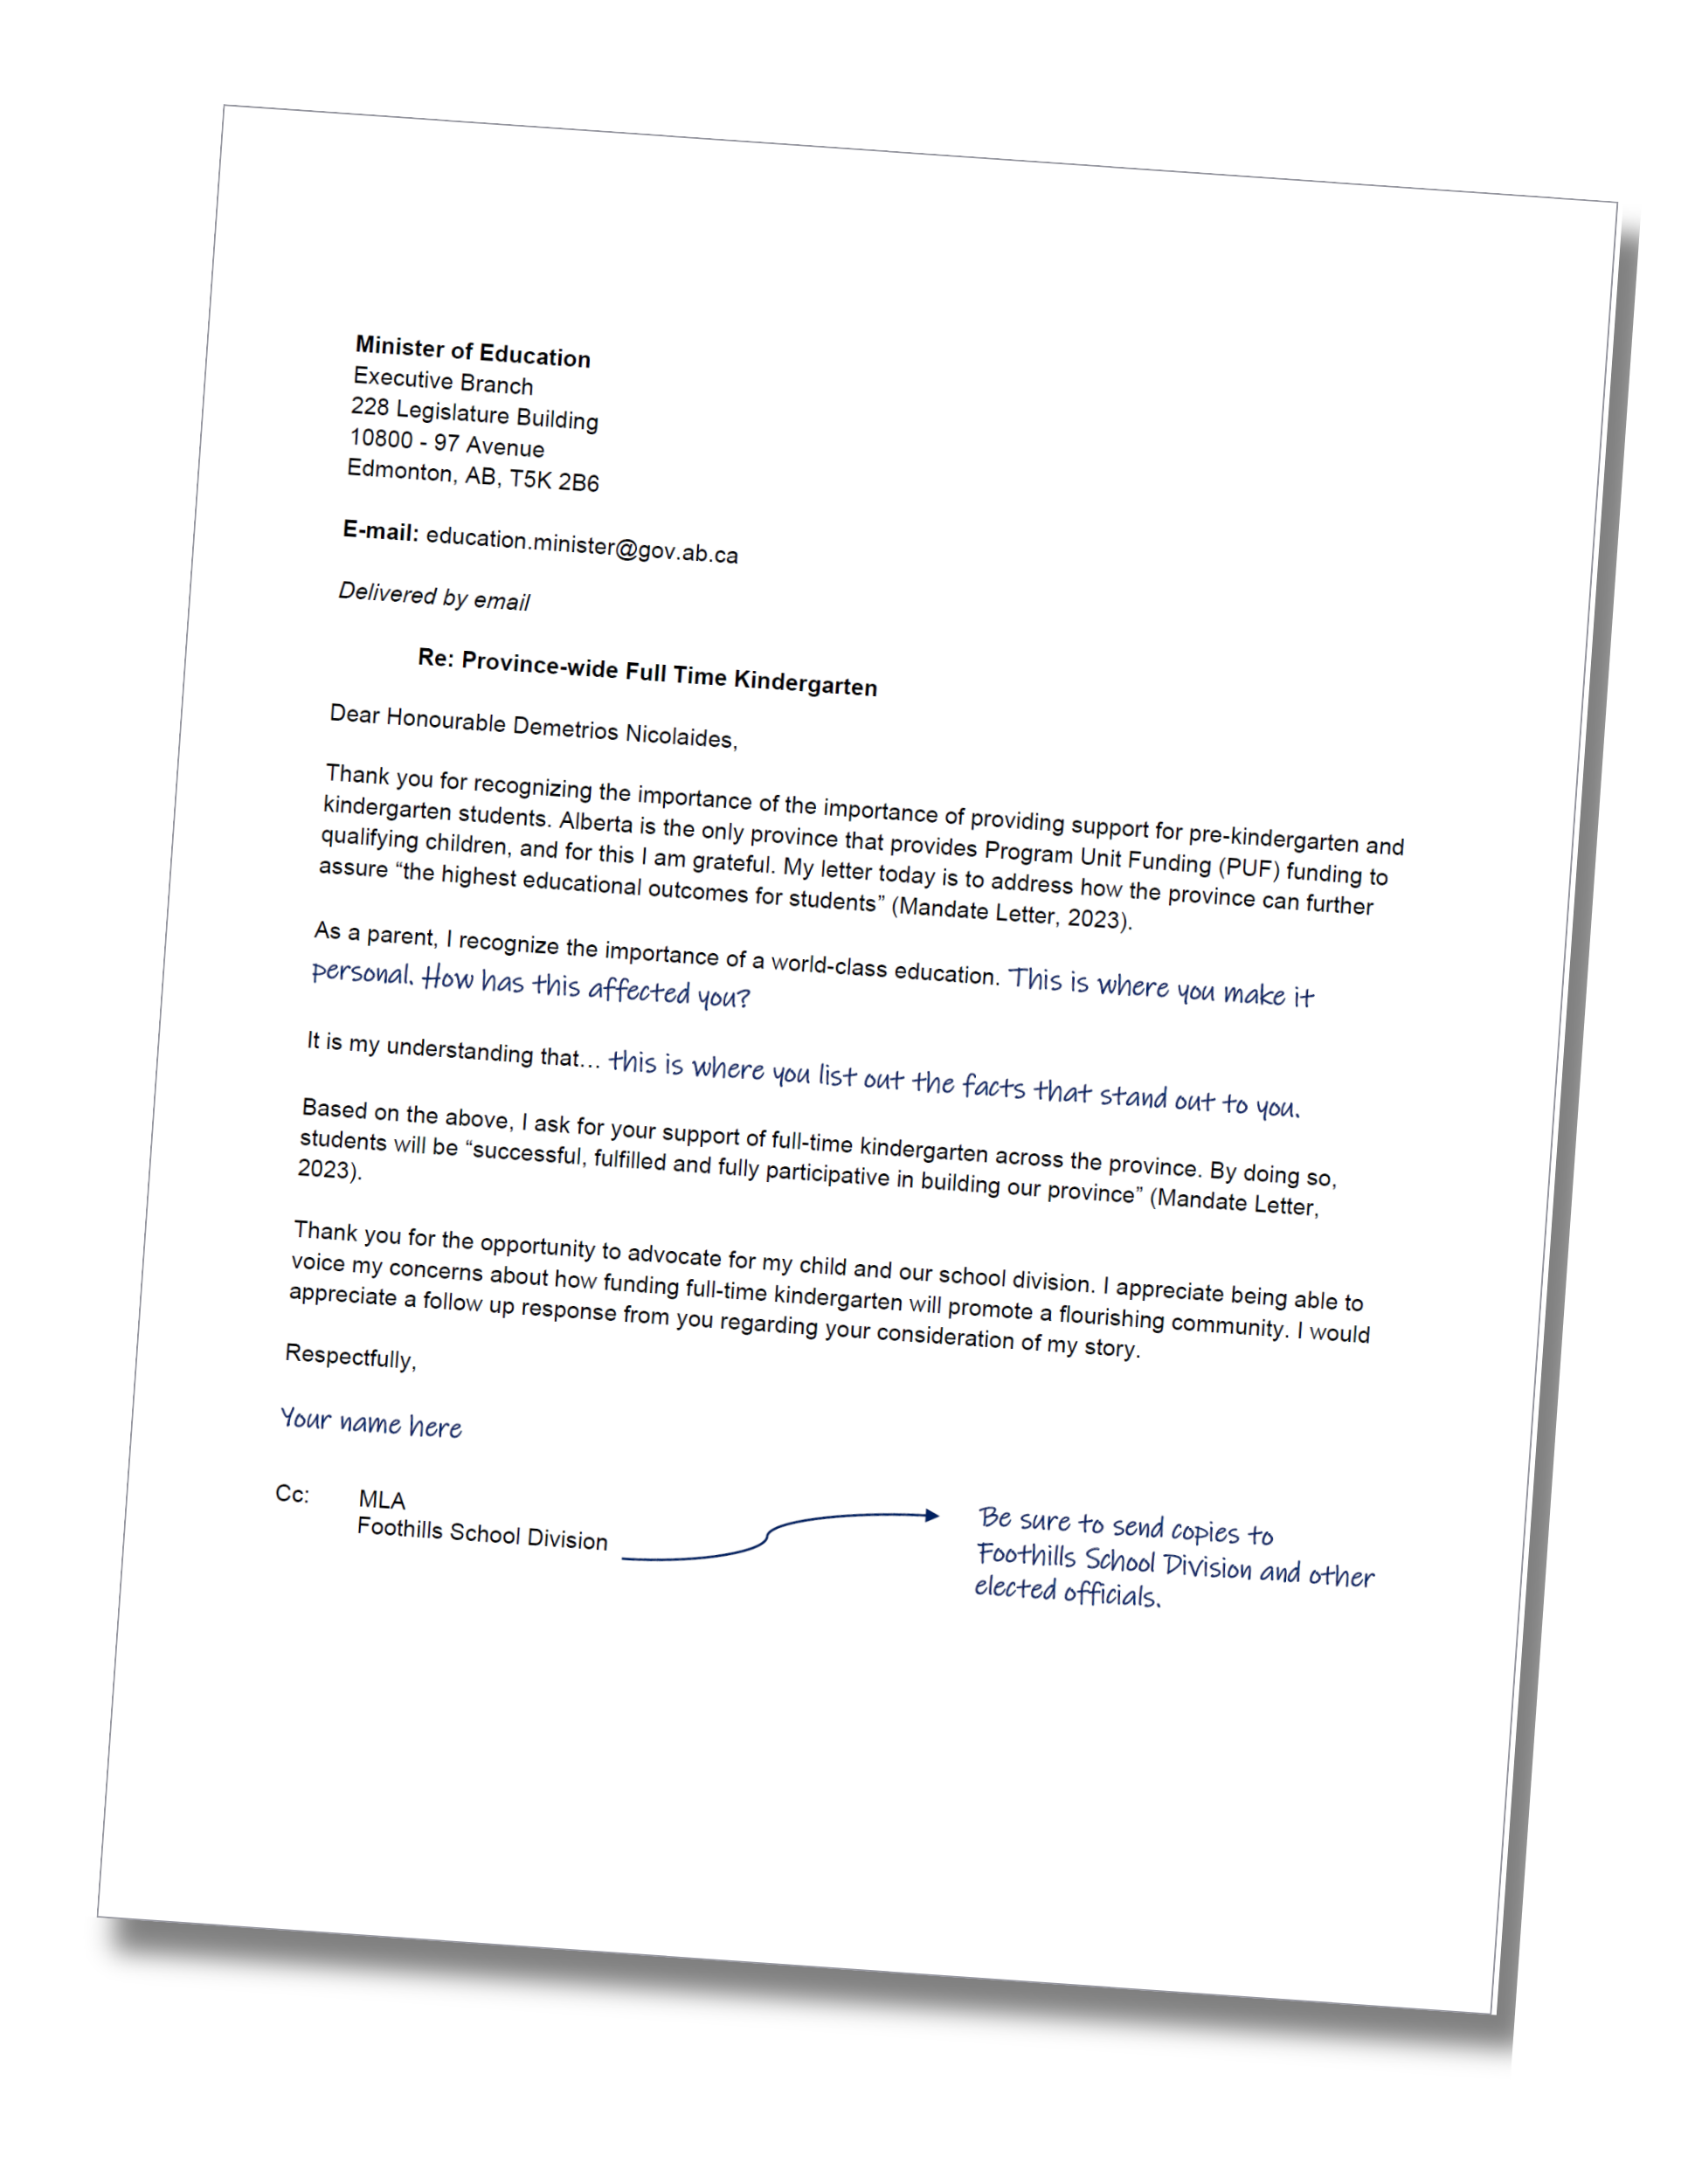 Advocacy-Sample Letter- img files-FTK.png